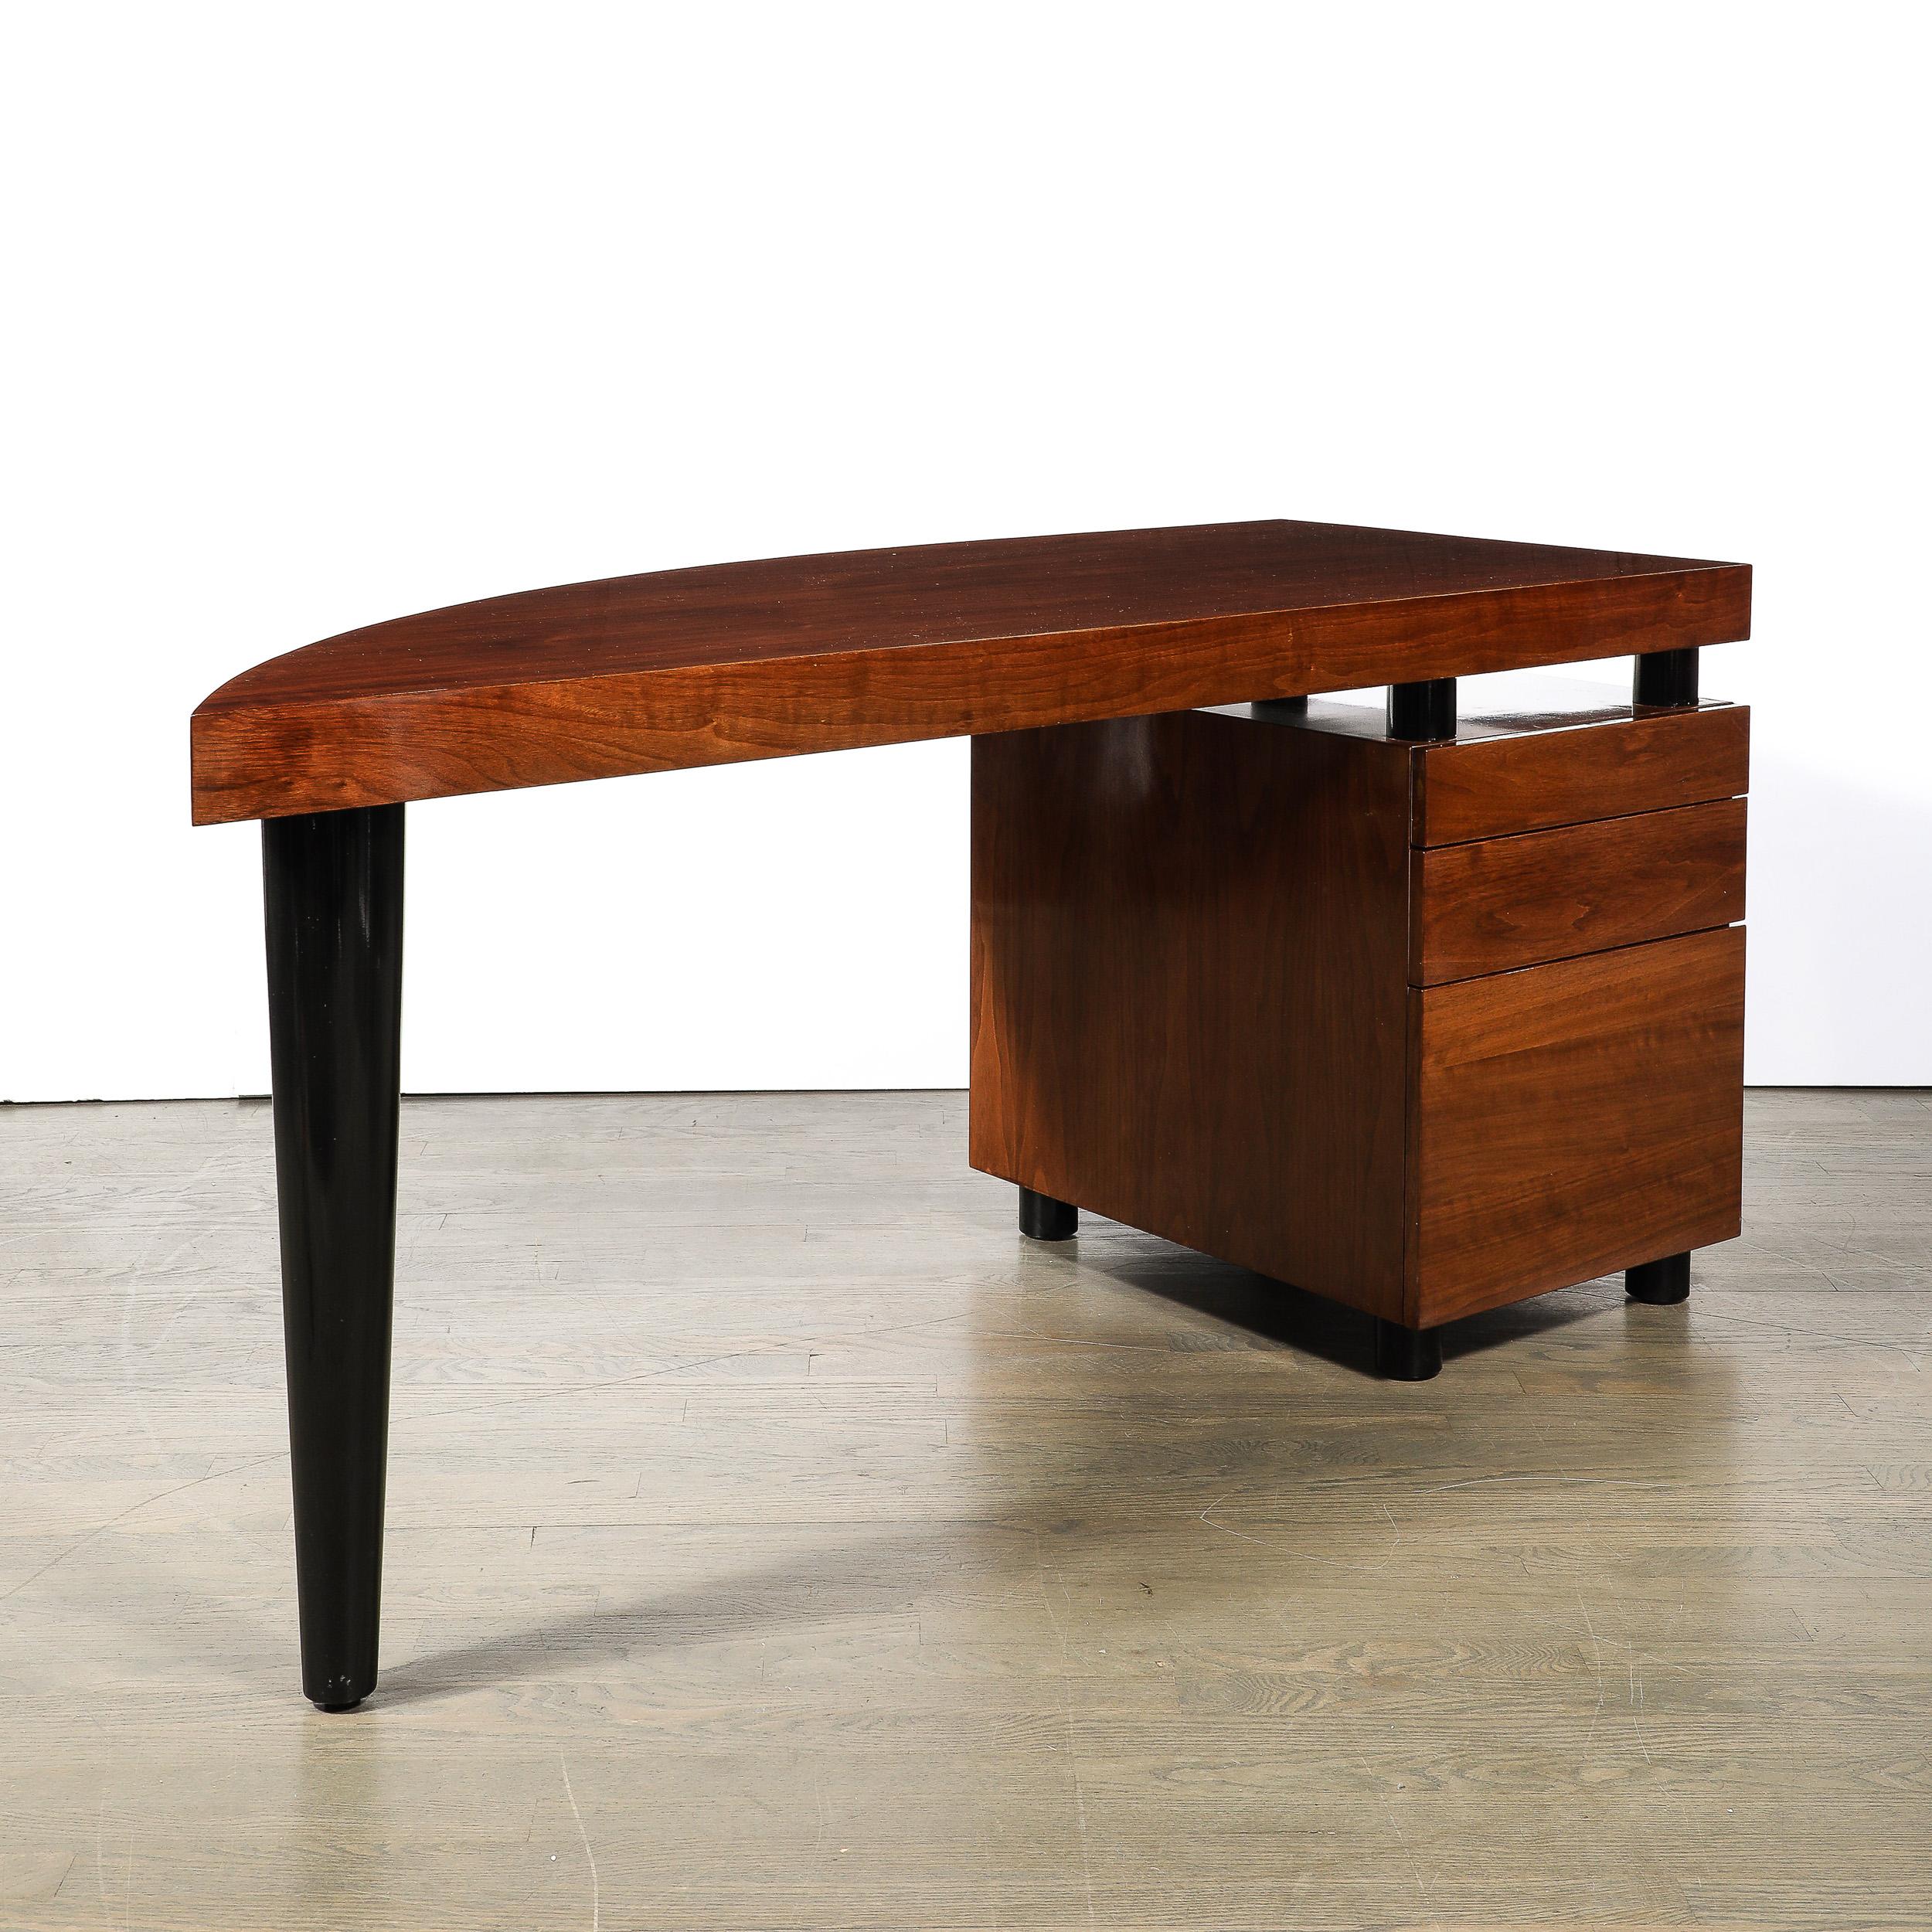 American Mid-Century Bookmatched Walnut W/ Tapered Leg Boca Desk by Leon Rosen for Pace